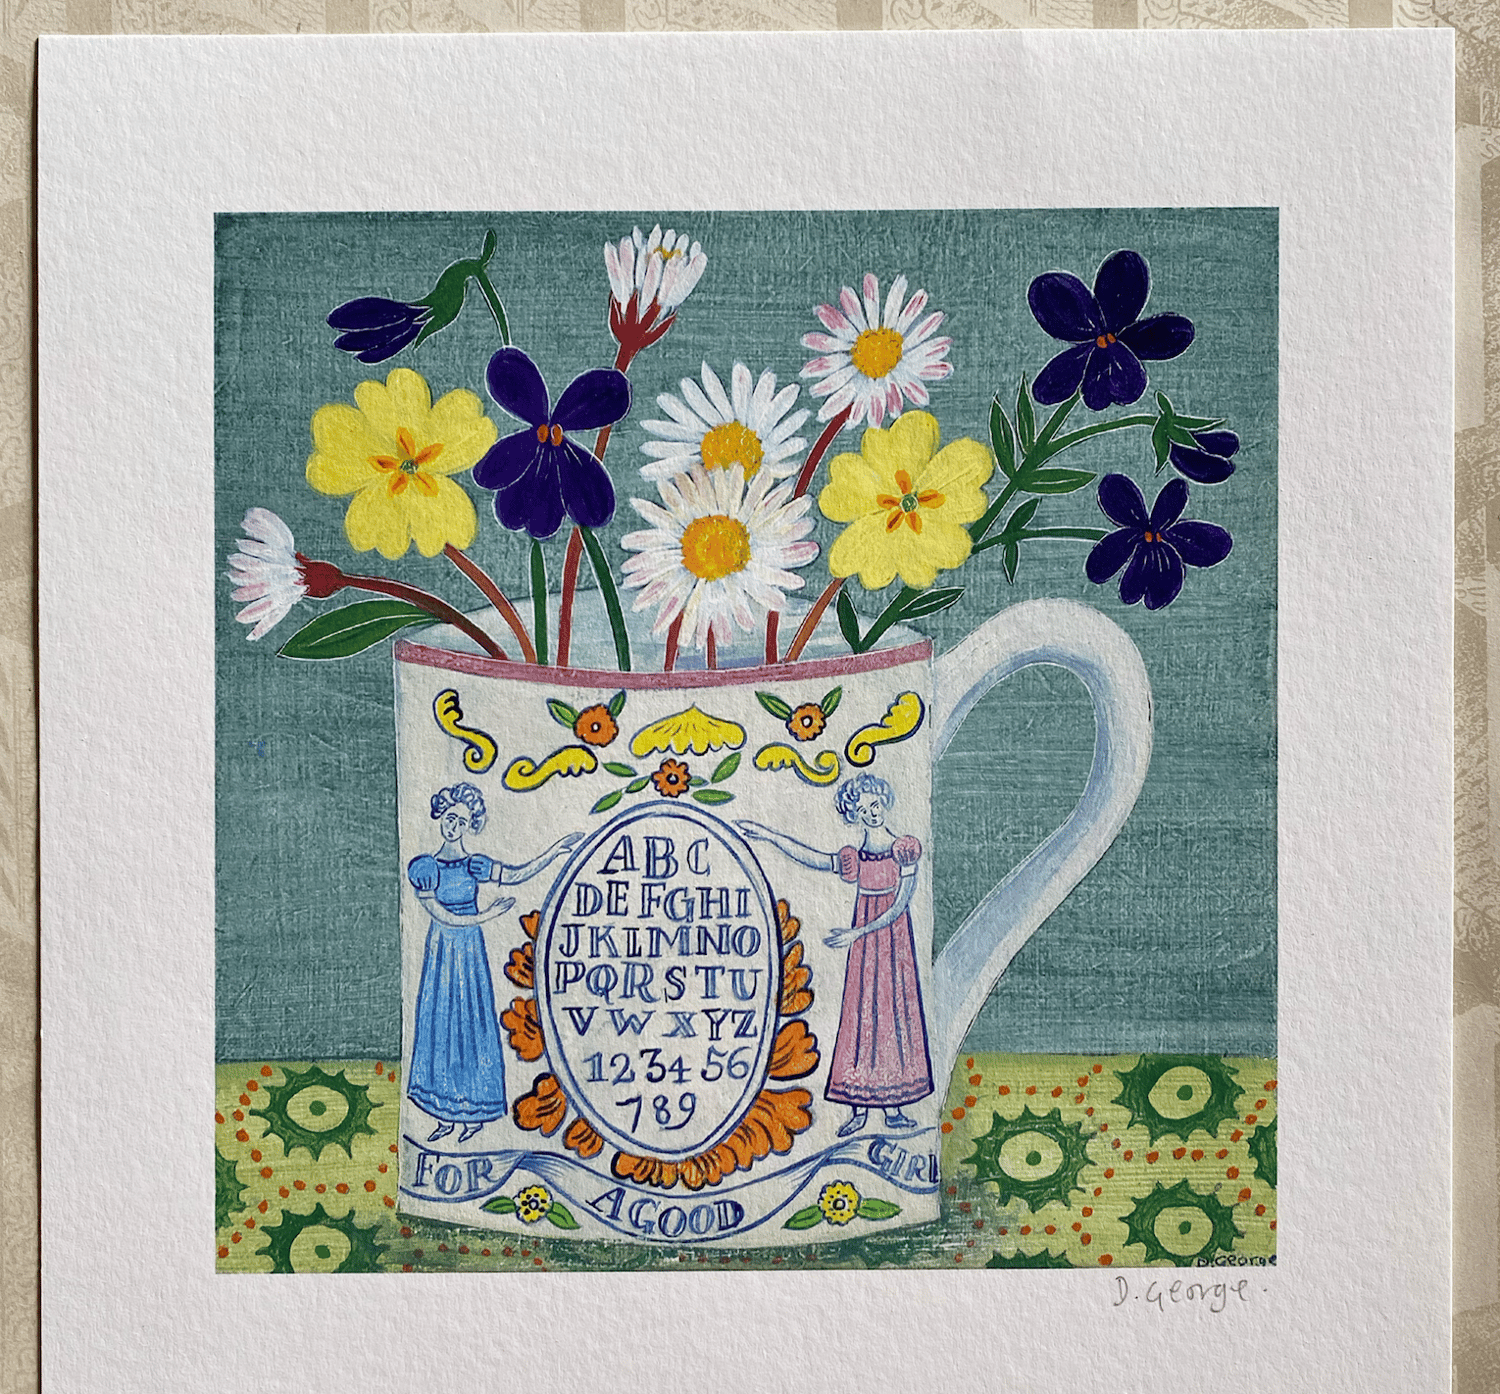 Image of A cup for a good girl Giclee print